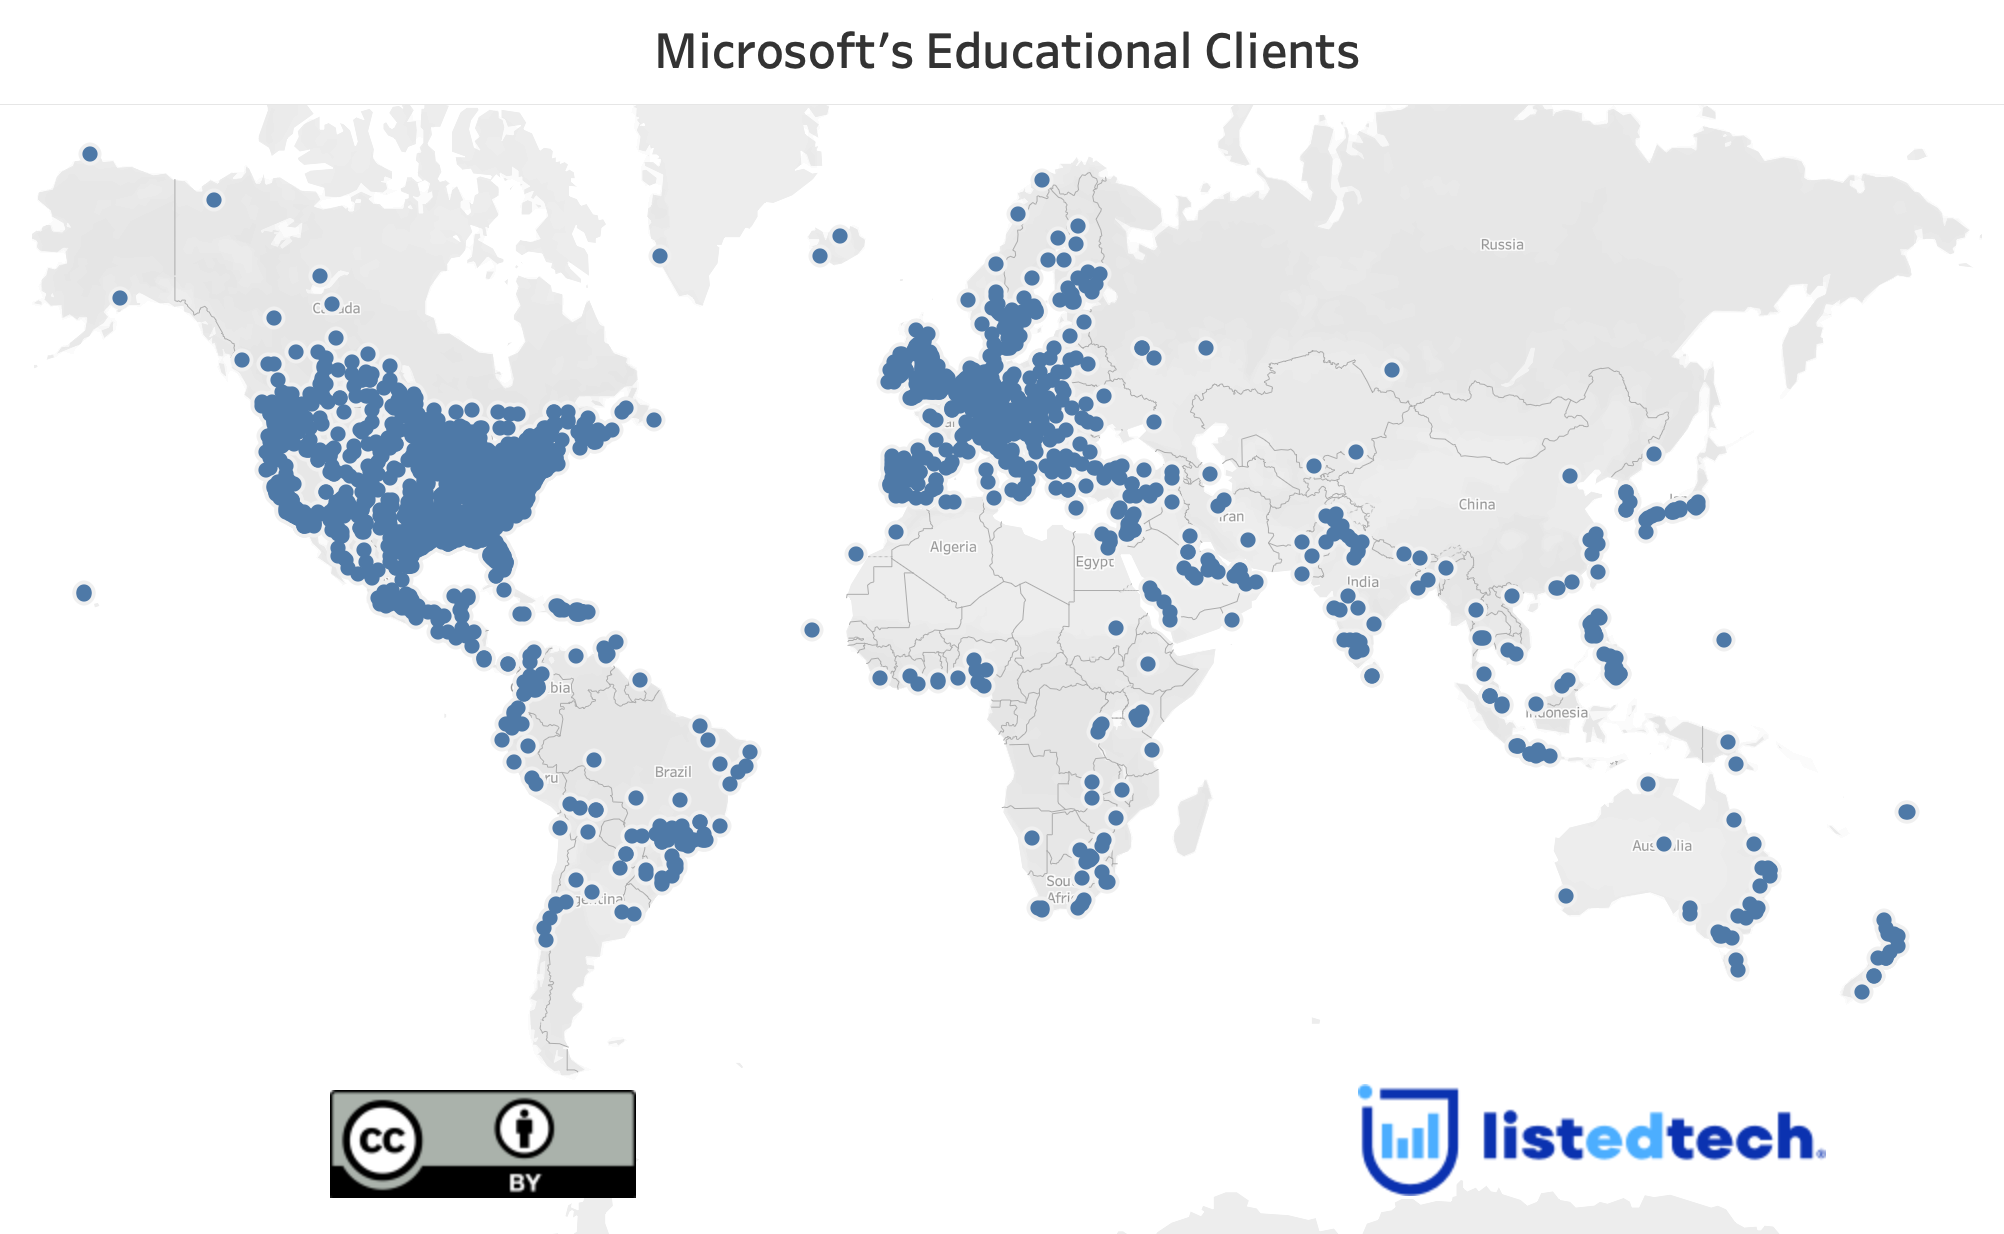 Microsoft: A Leading Global IT Solutions Provider for Education - LISTedTECH